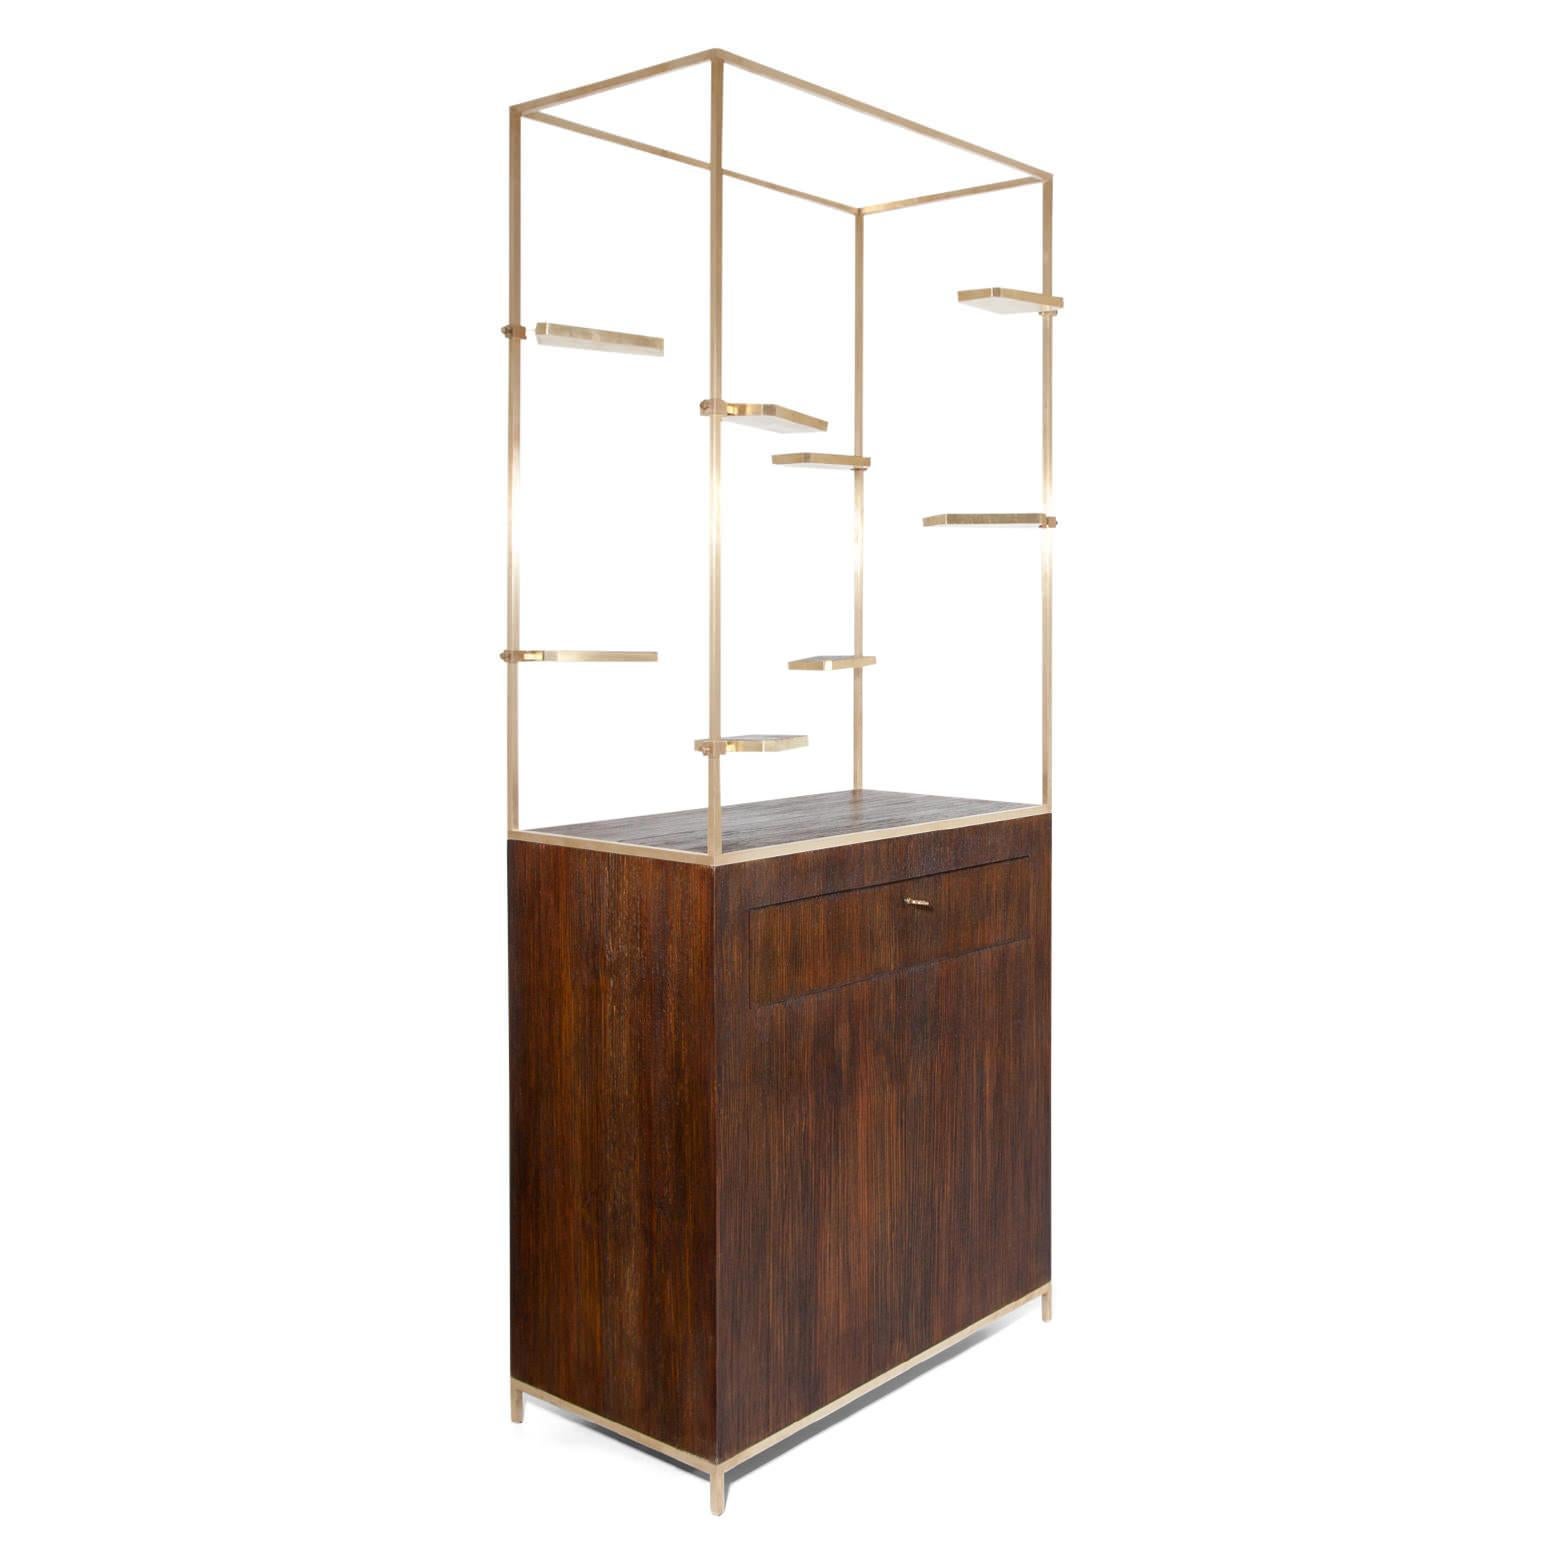 Midcentury shelf-unit out of brass with adjustable short shelves. The base has one drawer and is made out of palm wood.